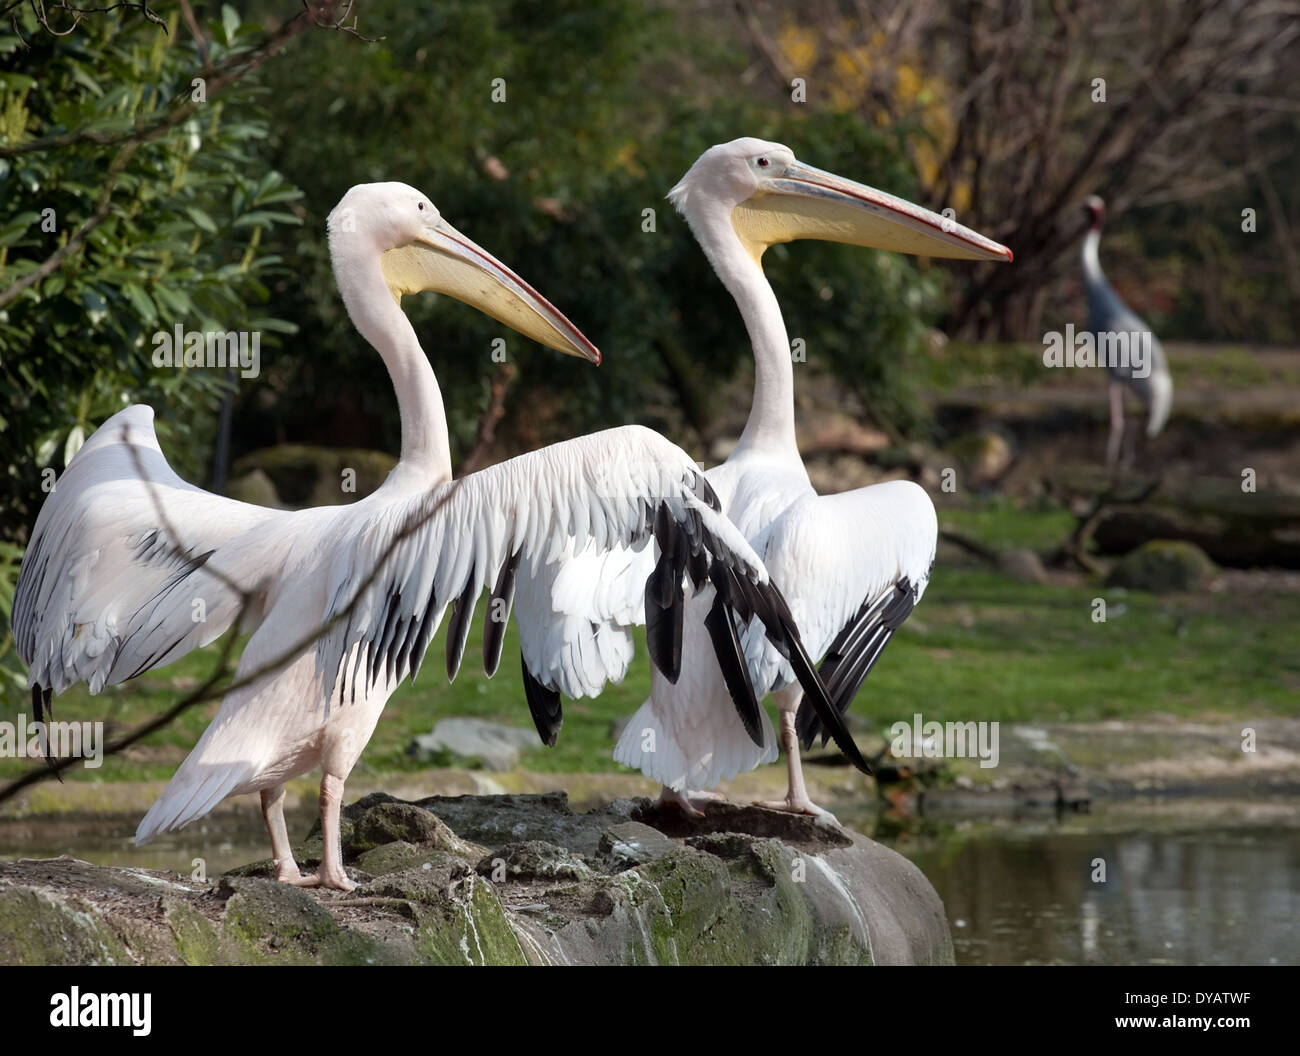 two pelicans, closeup view with yellow beaks and big wide wings Stock Photo